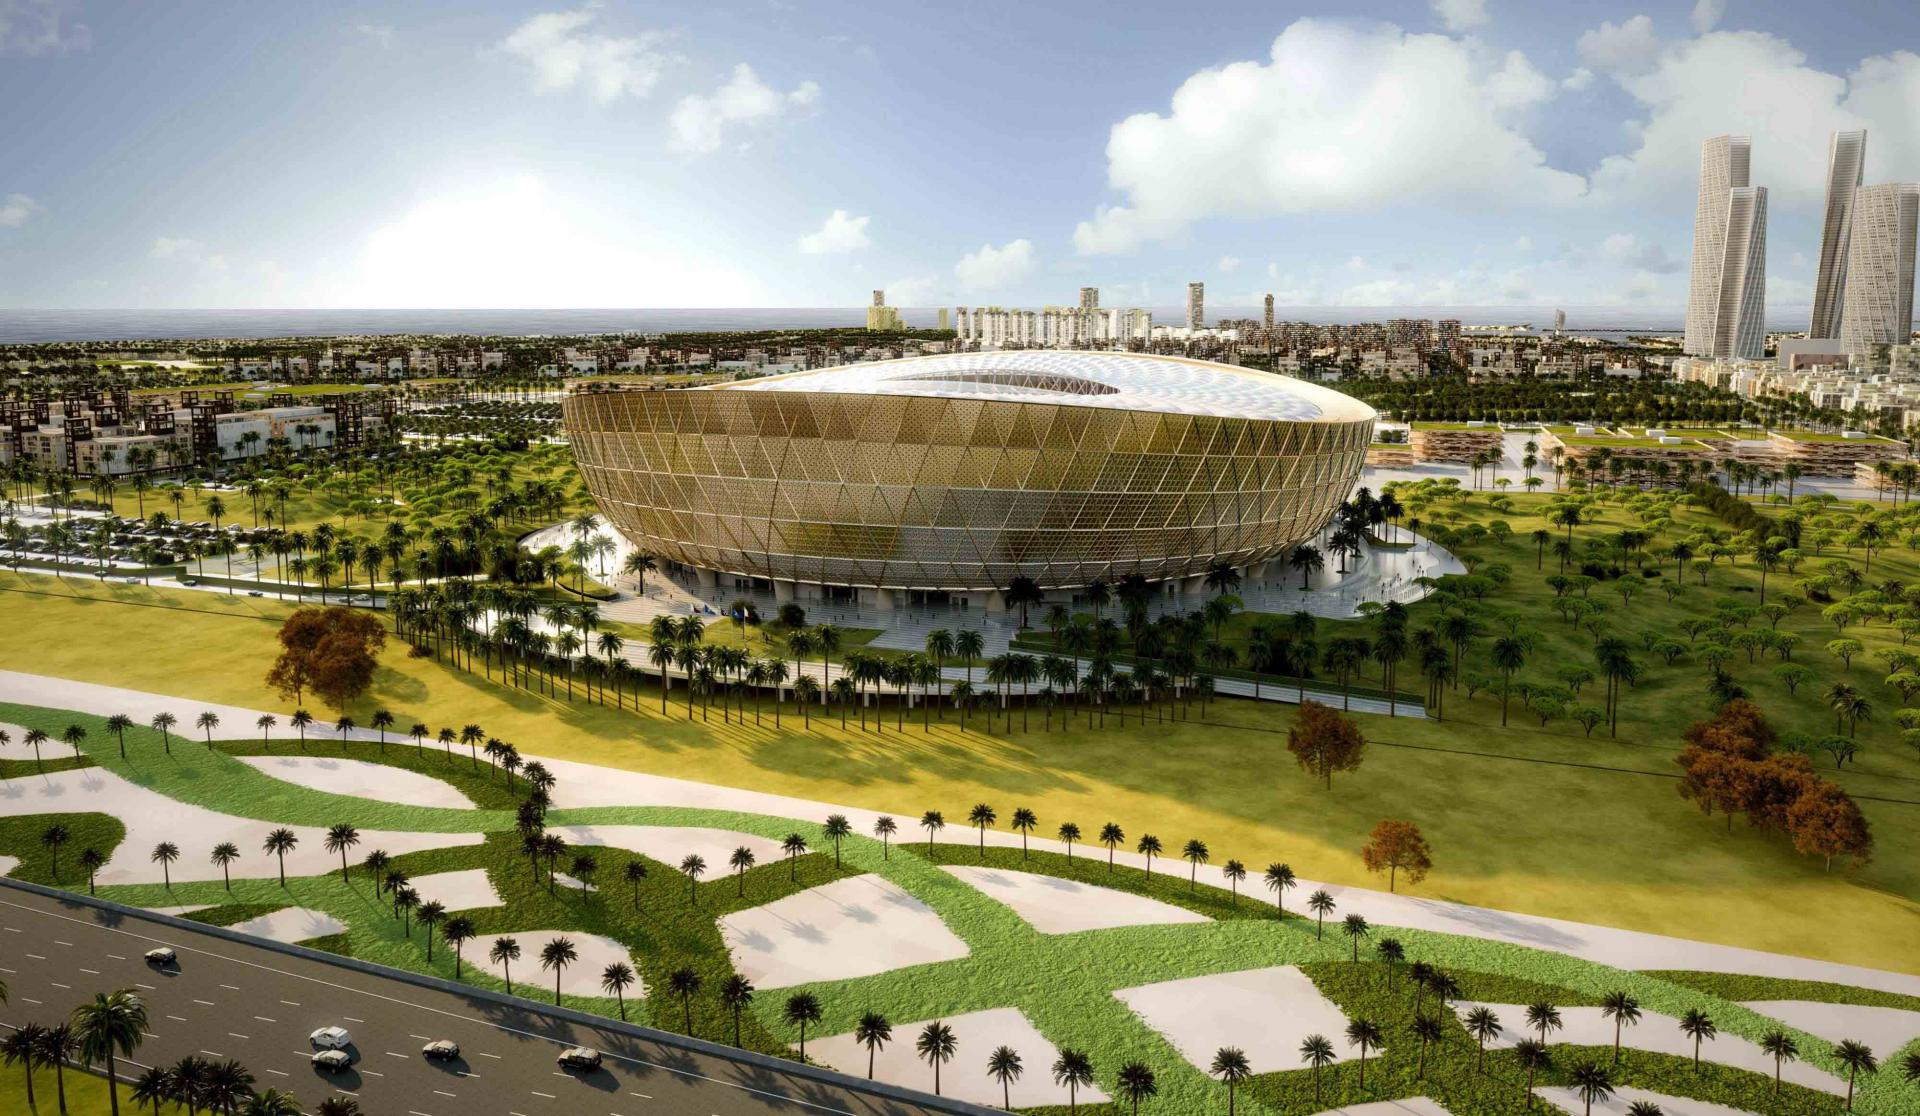 Designed by British architects Foster and Partners, the stadium is said to take its inspiration from Arab craftmanship